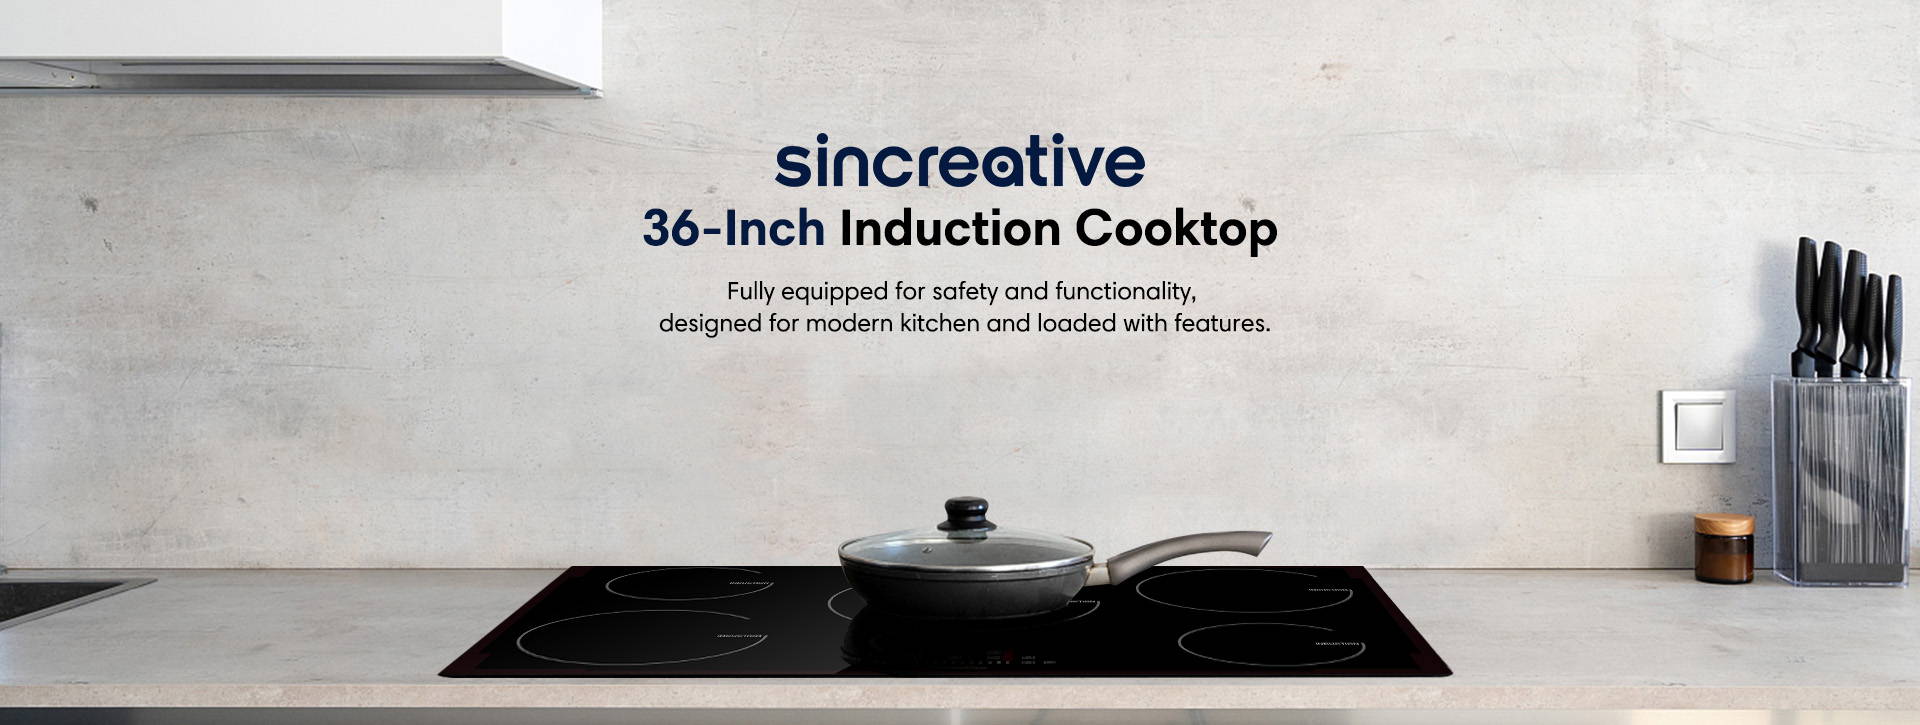 Sincreative 36 inch induction cooktop Fully equipped for safty and functionality, designed for modern kitchen and loaded with features.